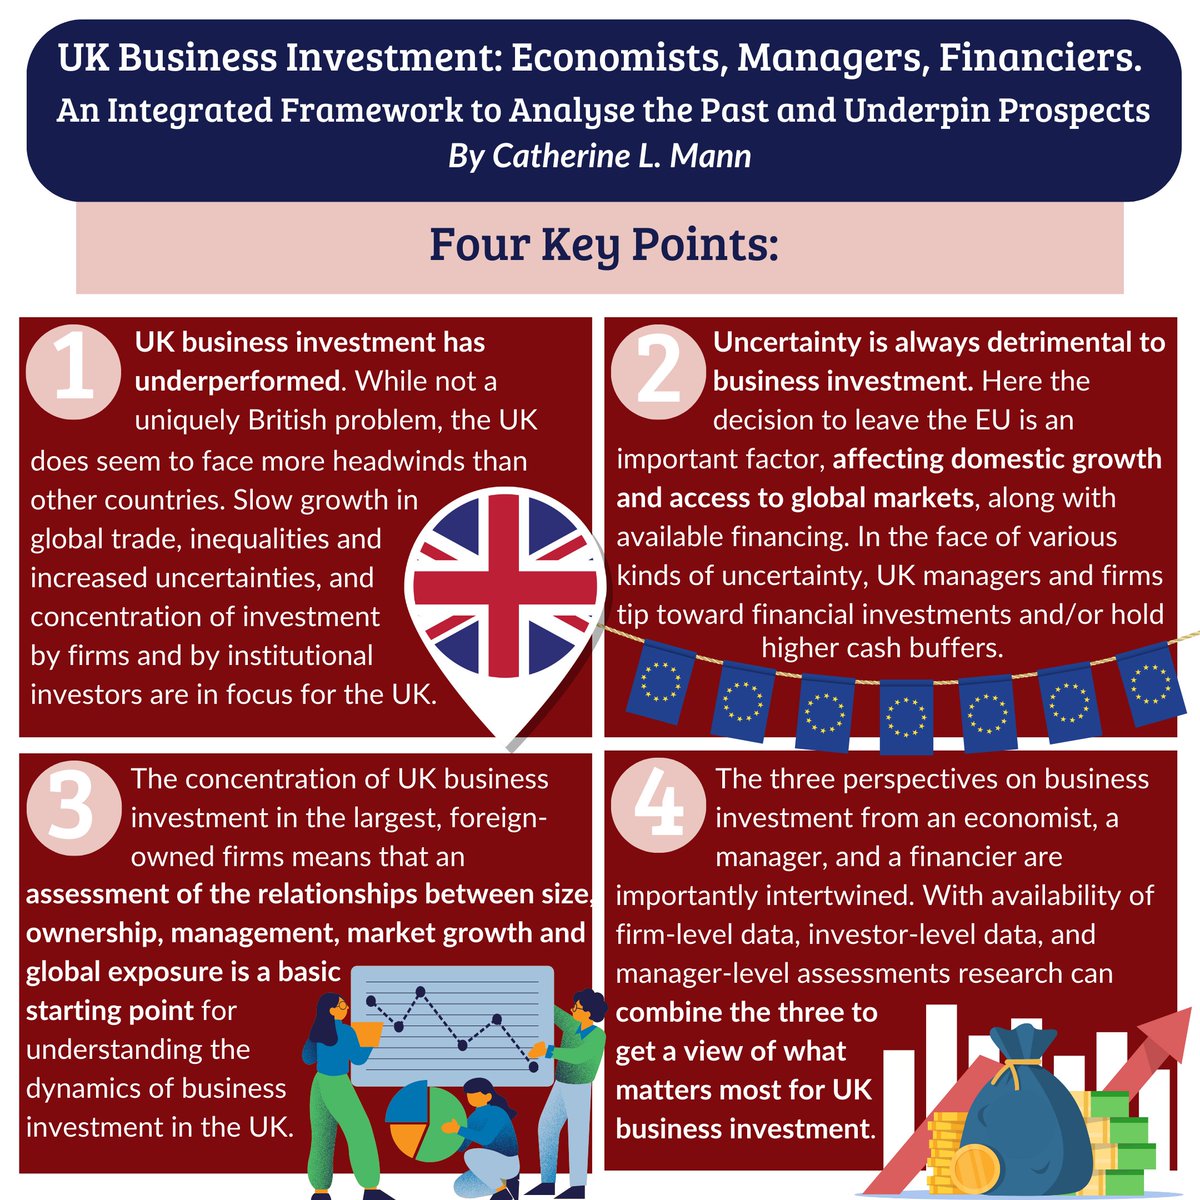 🚨 NEW PAPER 🚨 Read Catherine Mann's latest work, 'UK Business Investment: Economists, Managers, Financiers' 🔓 'UK business #investment has underperformed... while this is not a uniquely British problem, the UK does appear to face more headwinds' 📉👇 niesr.ac.uk/publications/u…